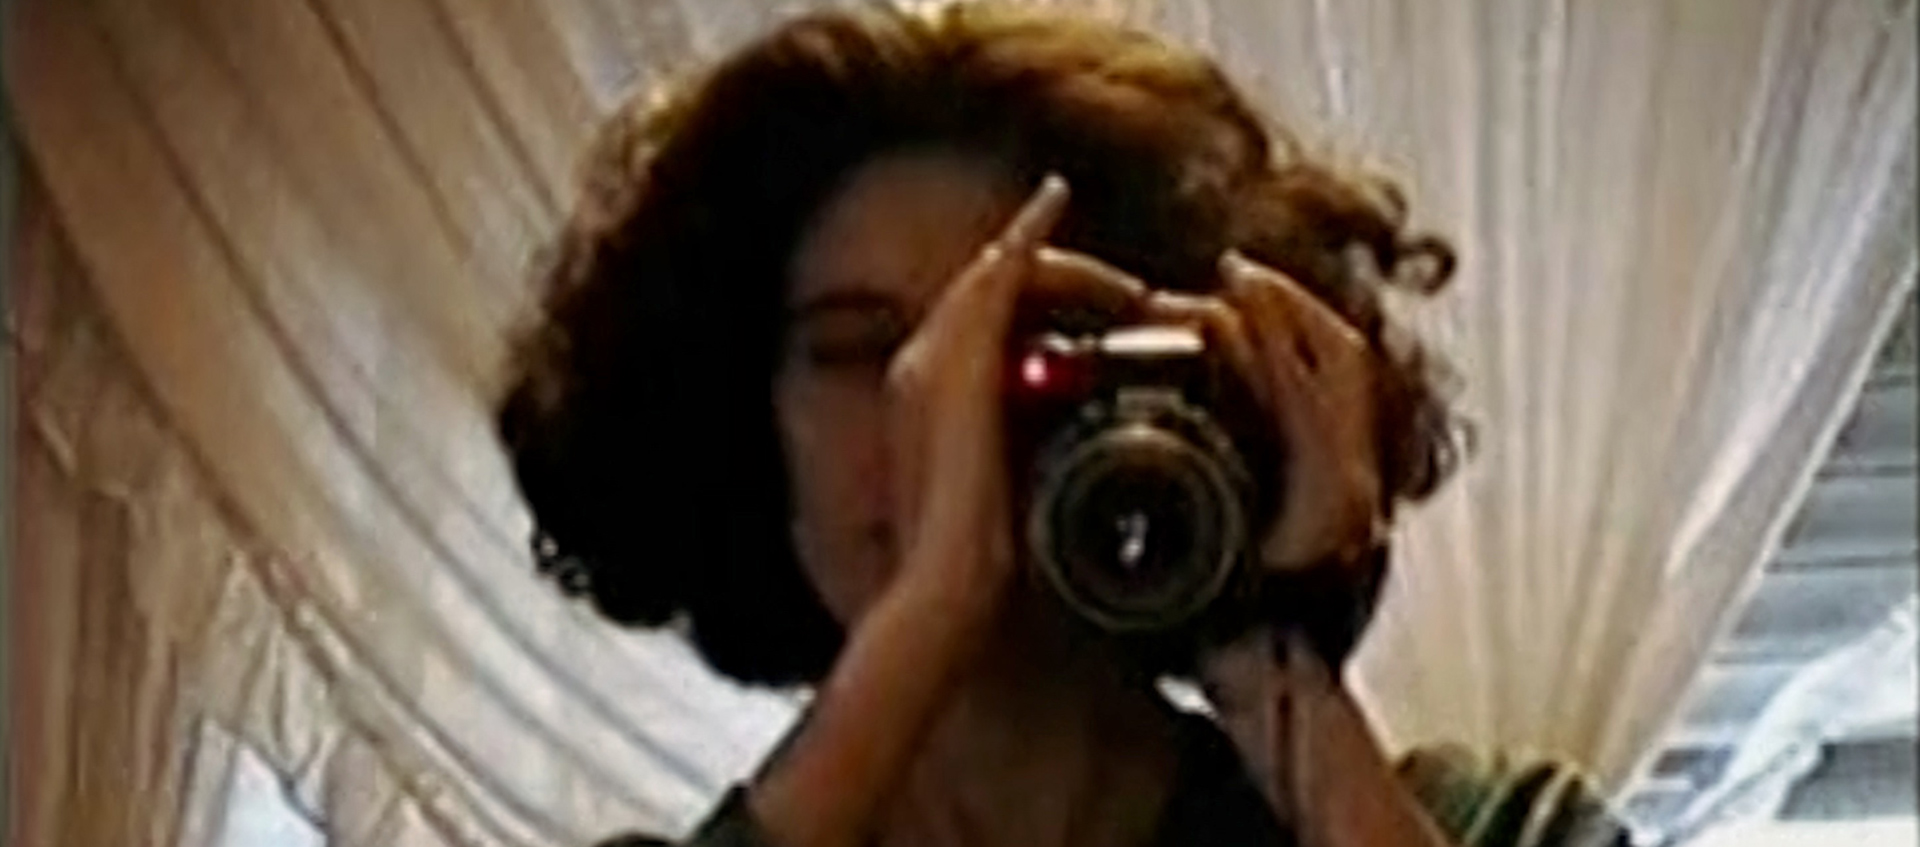 a woman with short curly hair holds a camera up to her face.